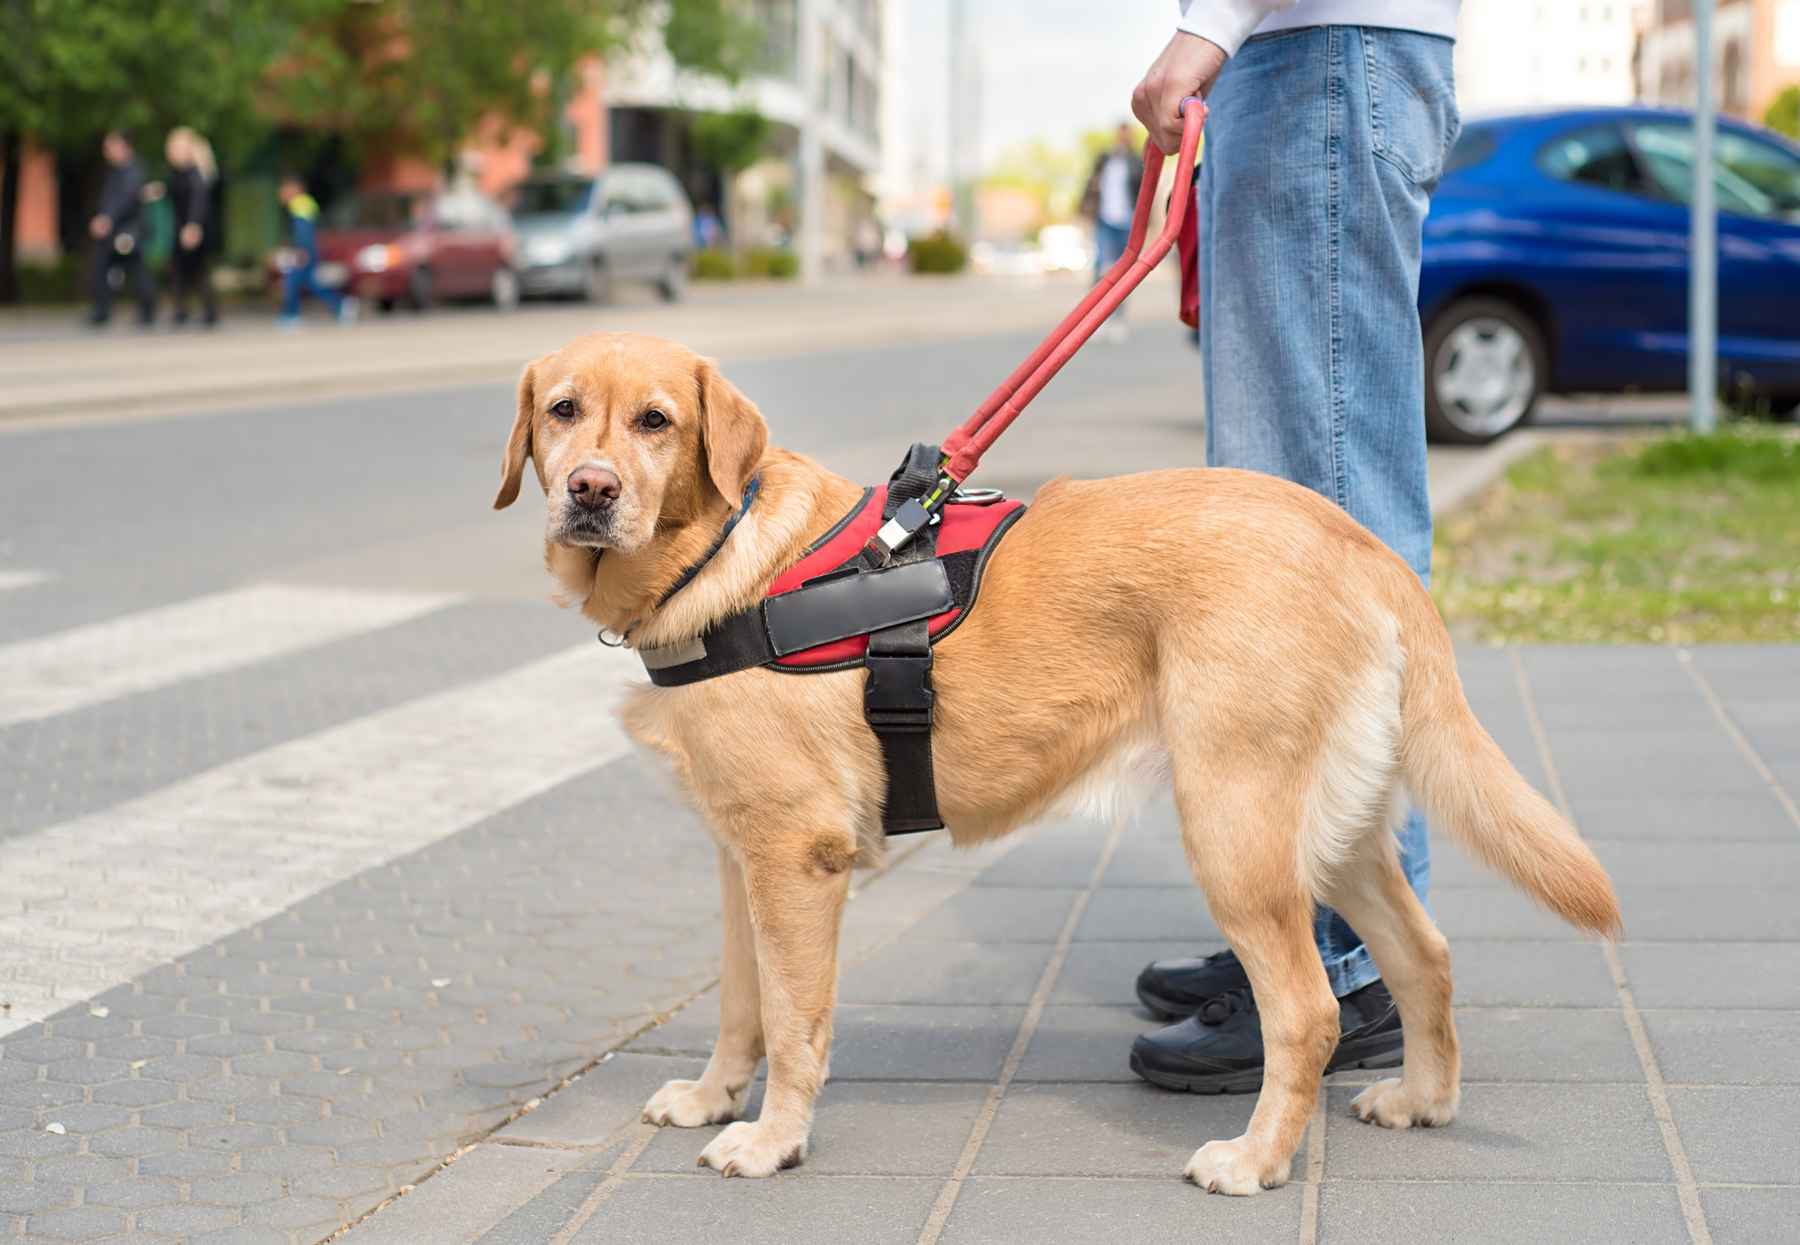 Service dog wearing a harness and guiding a man at a pedestrian crossing.